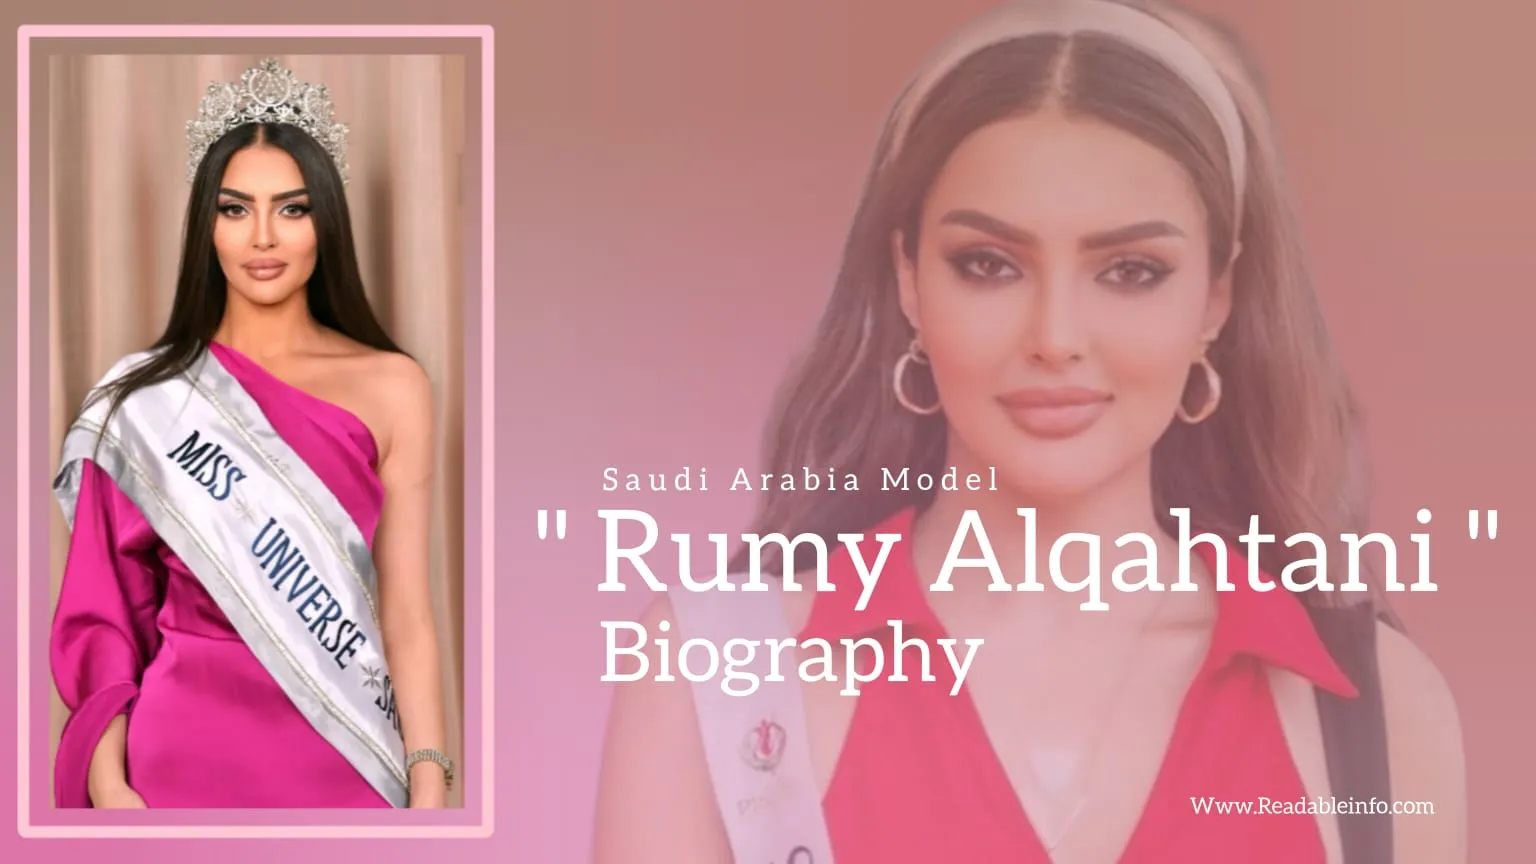 You are currently viewing Rumy Alqahtani Biography (Saudi Arabia Model)